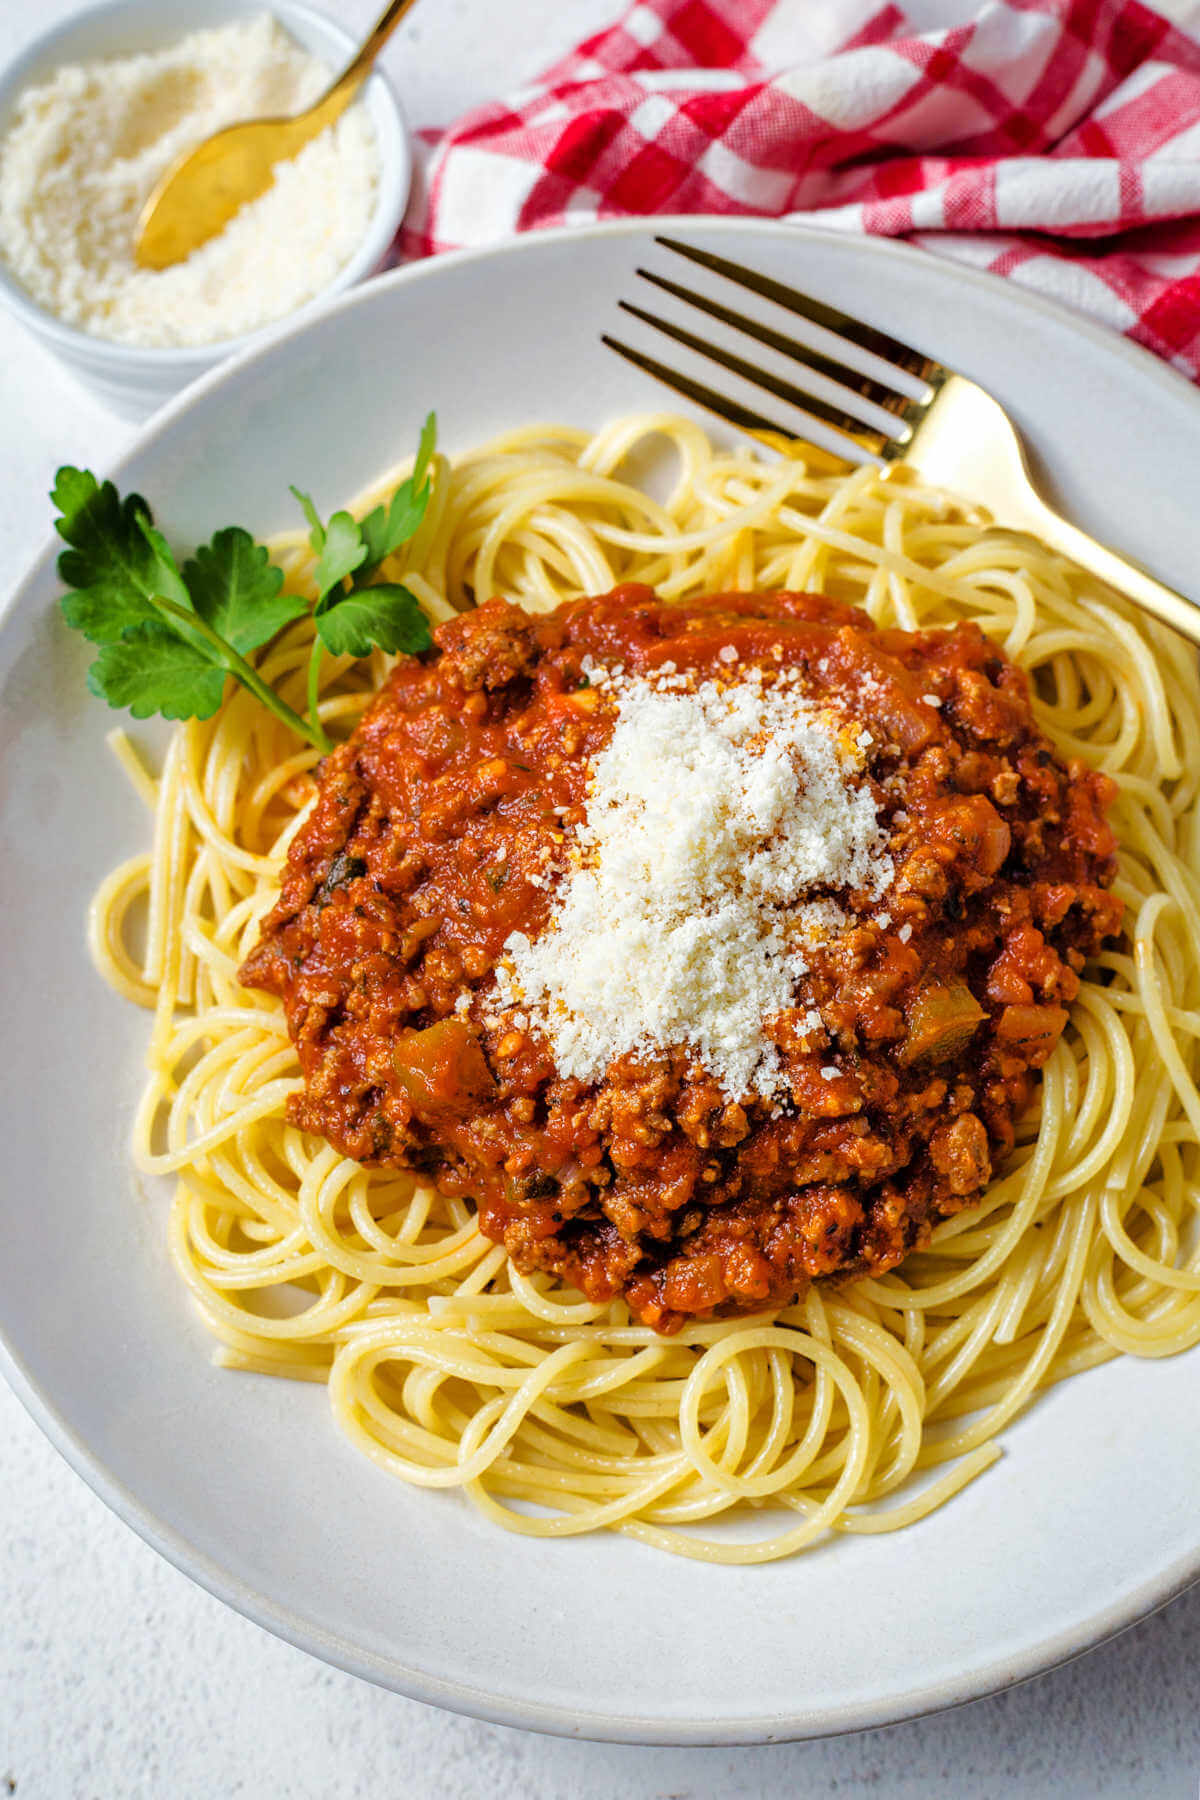 Italian meat sauce topped with parmesan cheese on a bed of spaghetti noodles in a white bowl.